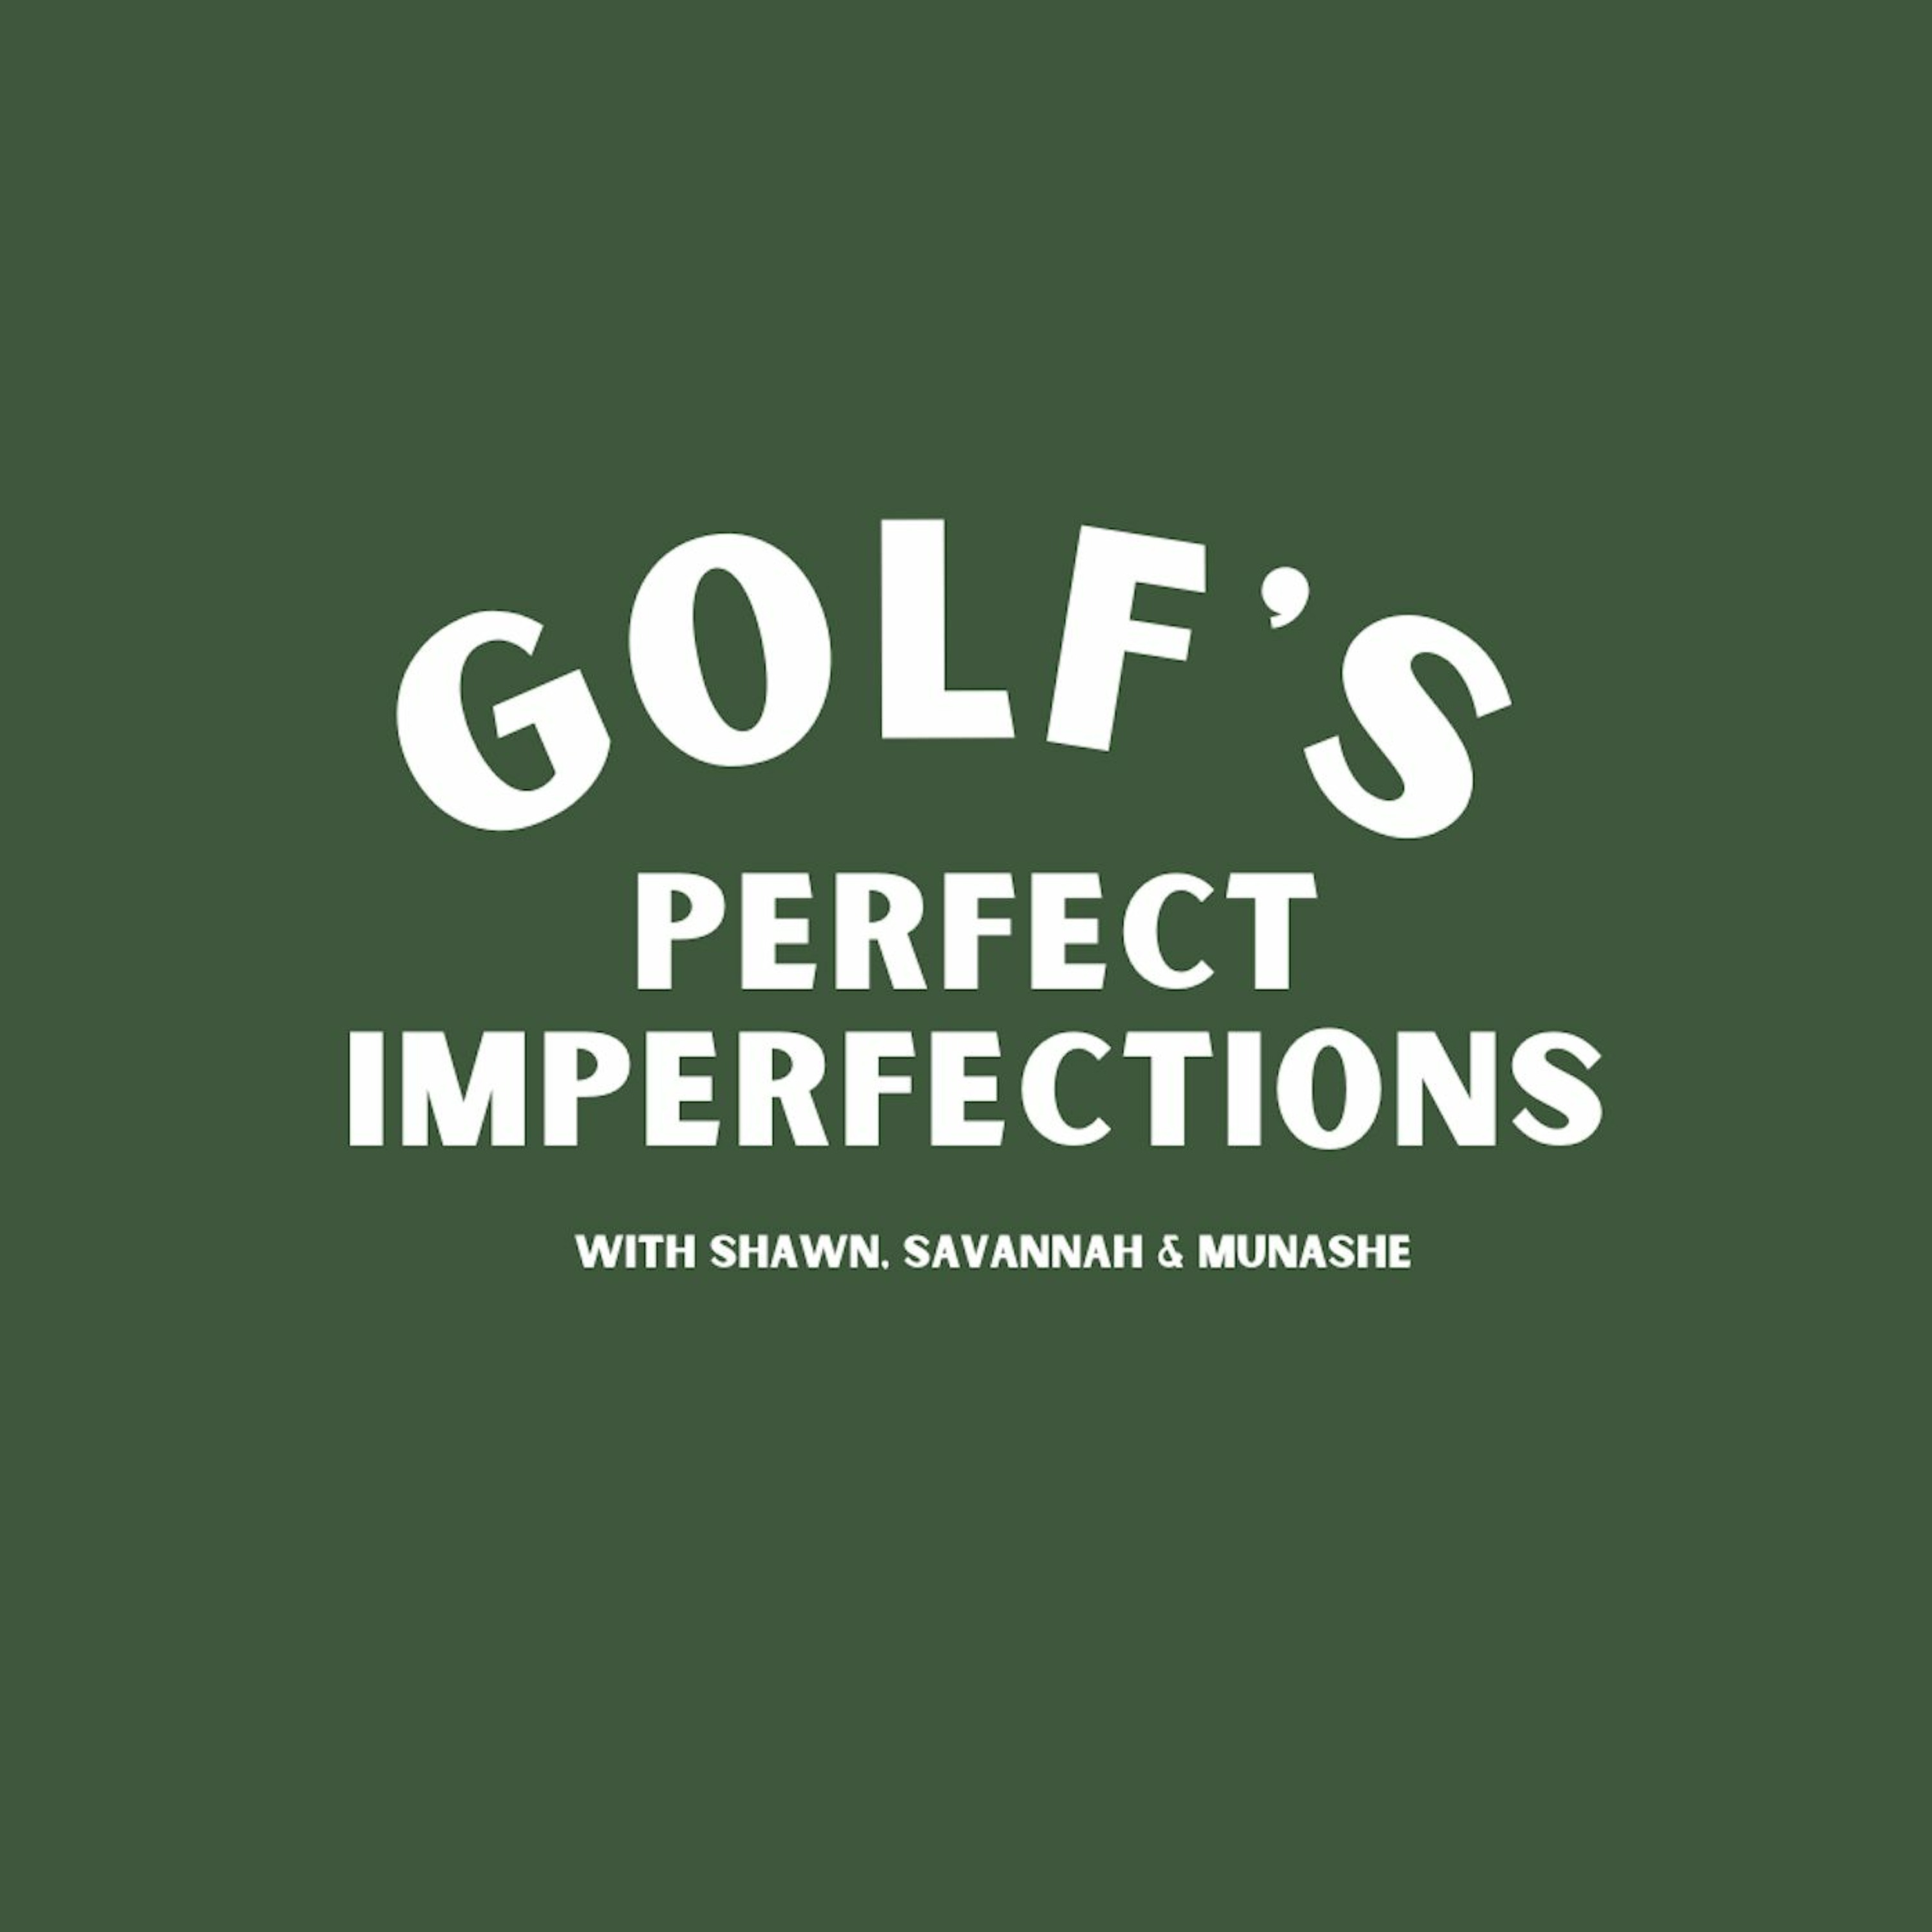 Golf’s Perfect Imperfections: A Nice Next-Level Analogy and Task